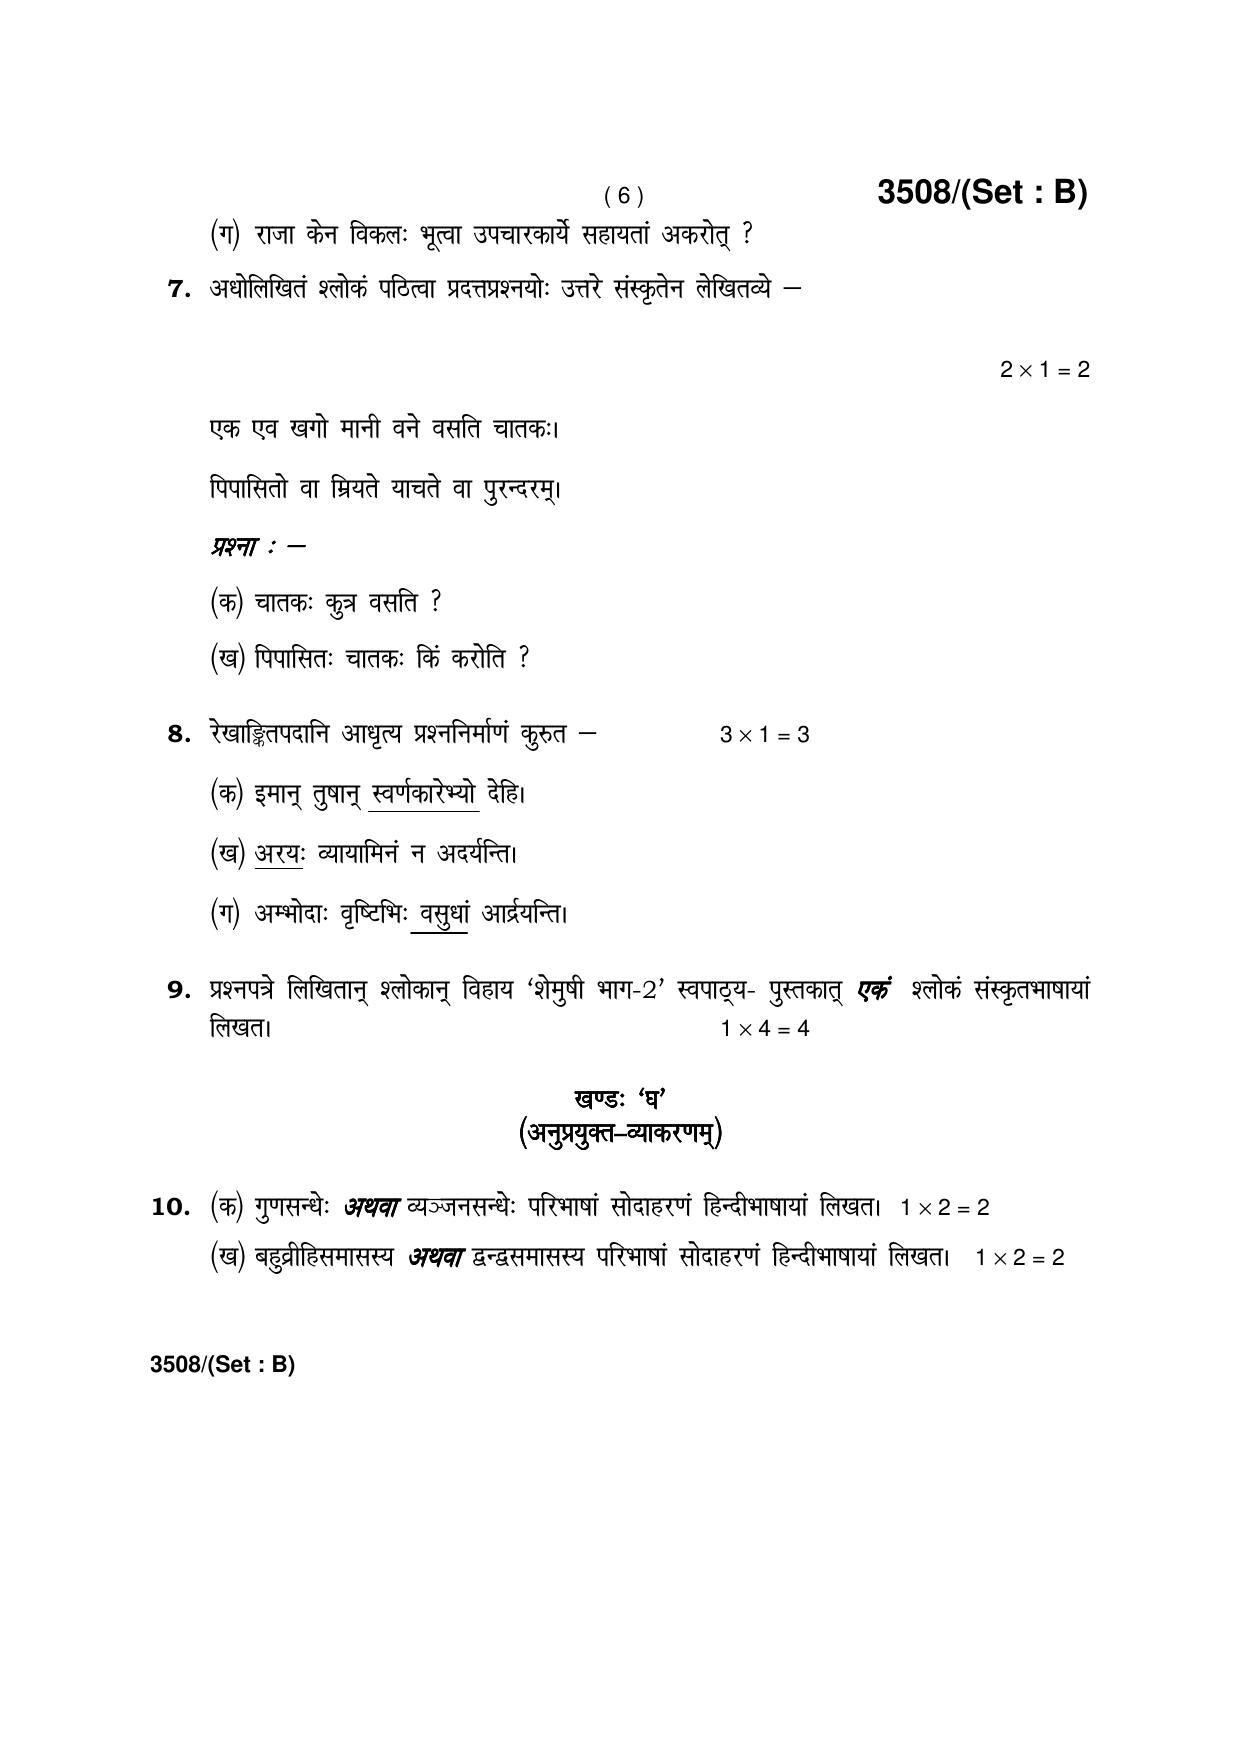 Haryana Board HBSE Class 10 Sanskrit -B 2018 Question Paper - Page 6